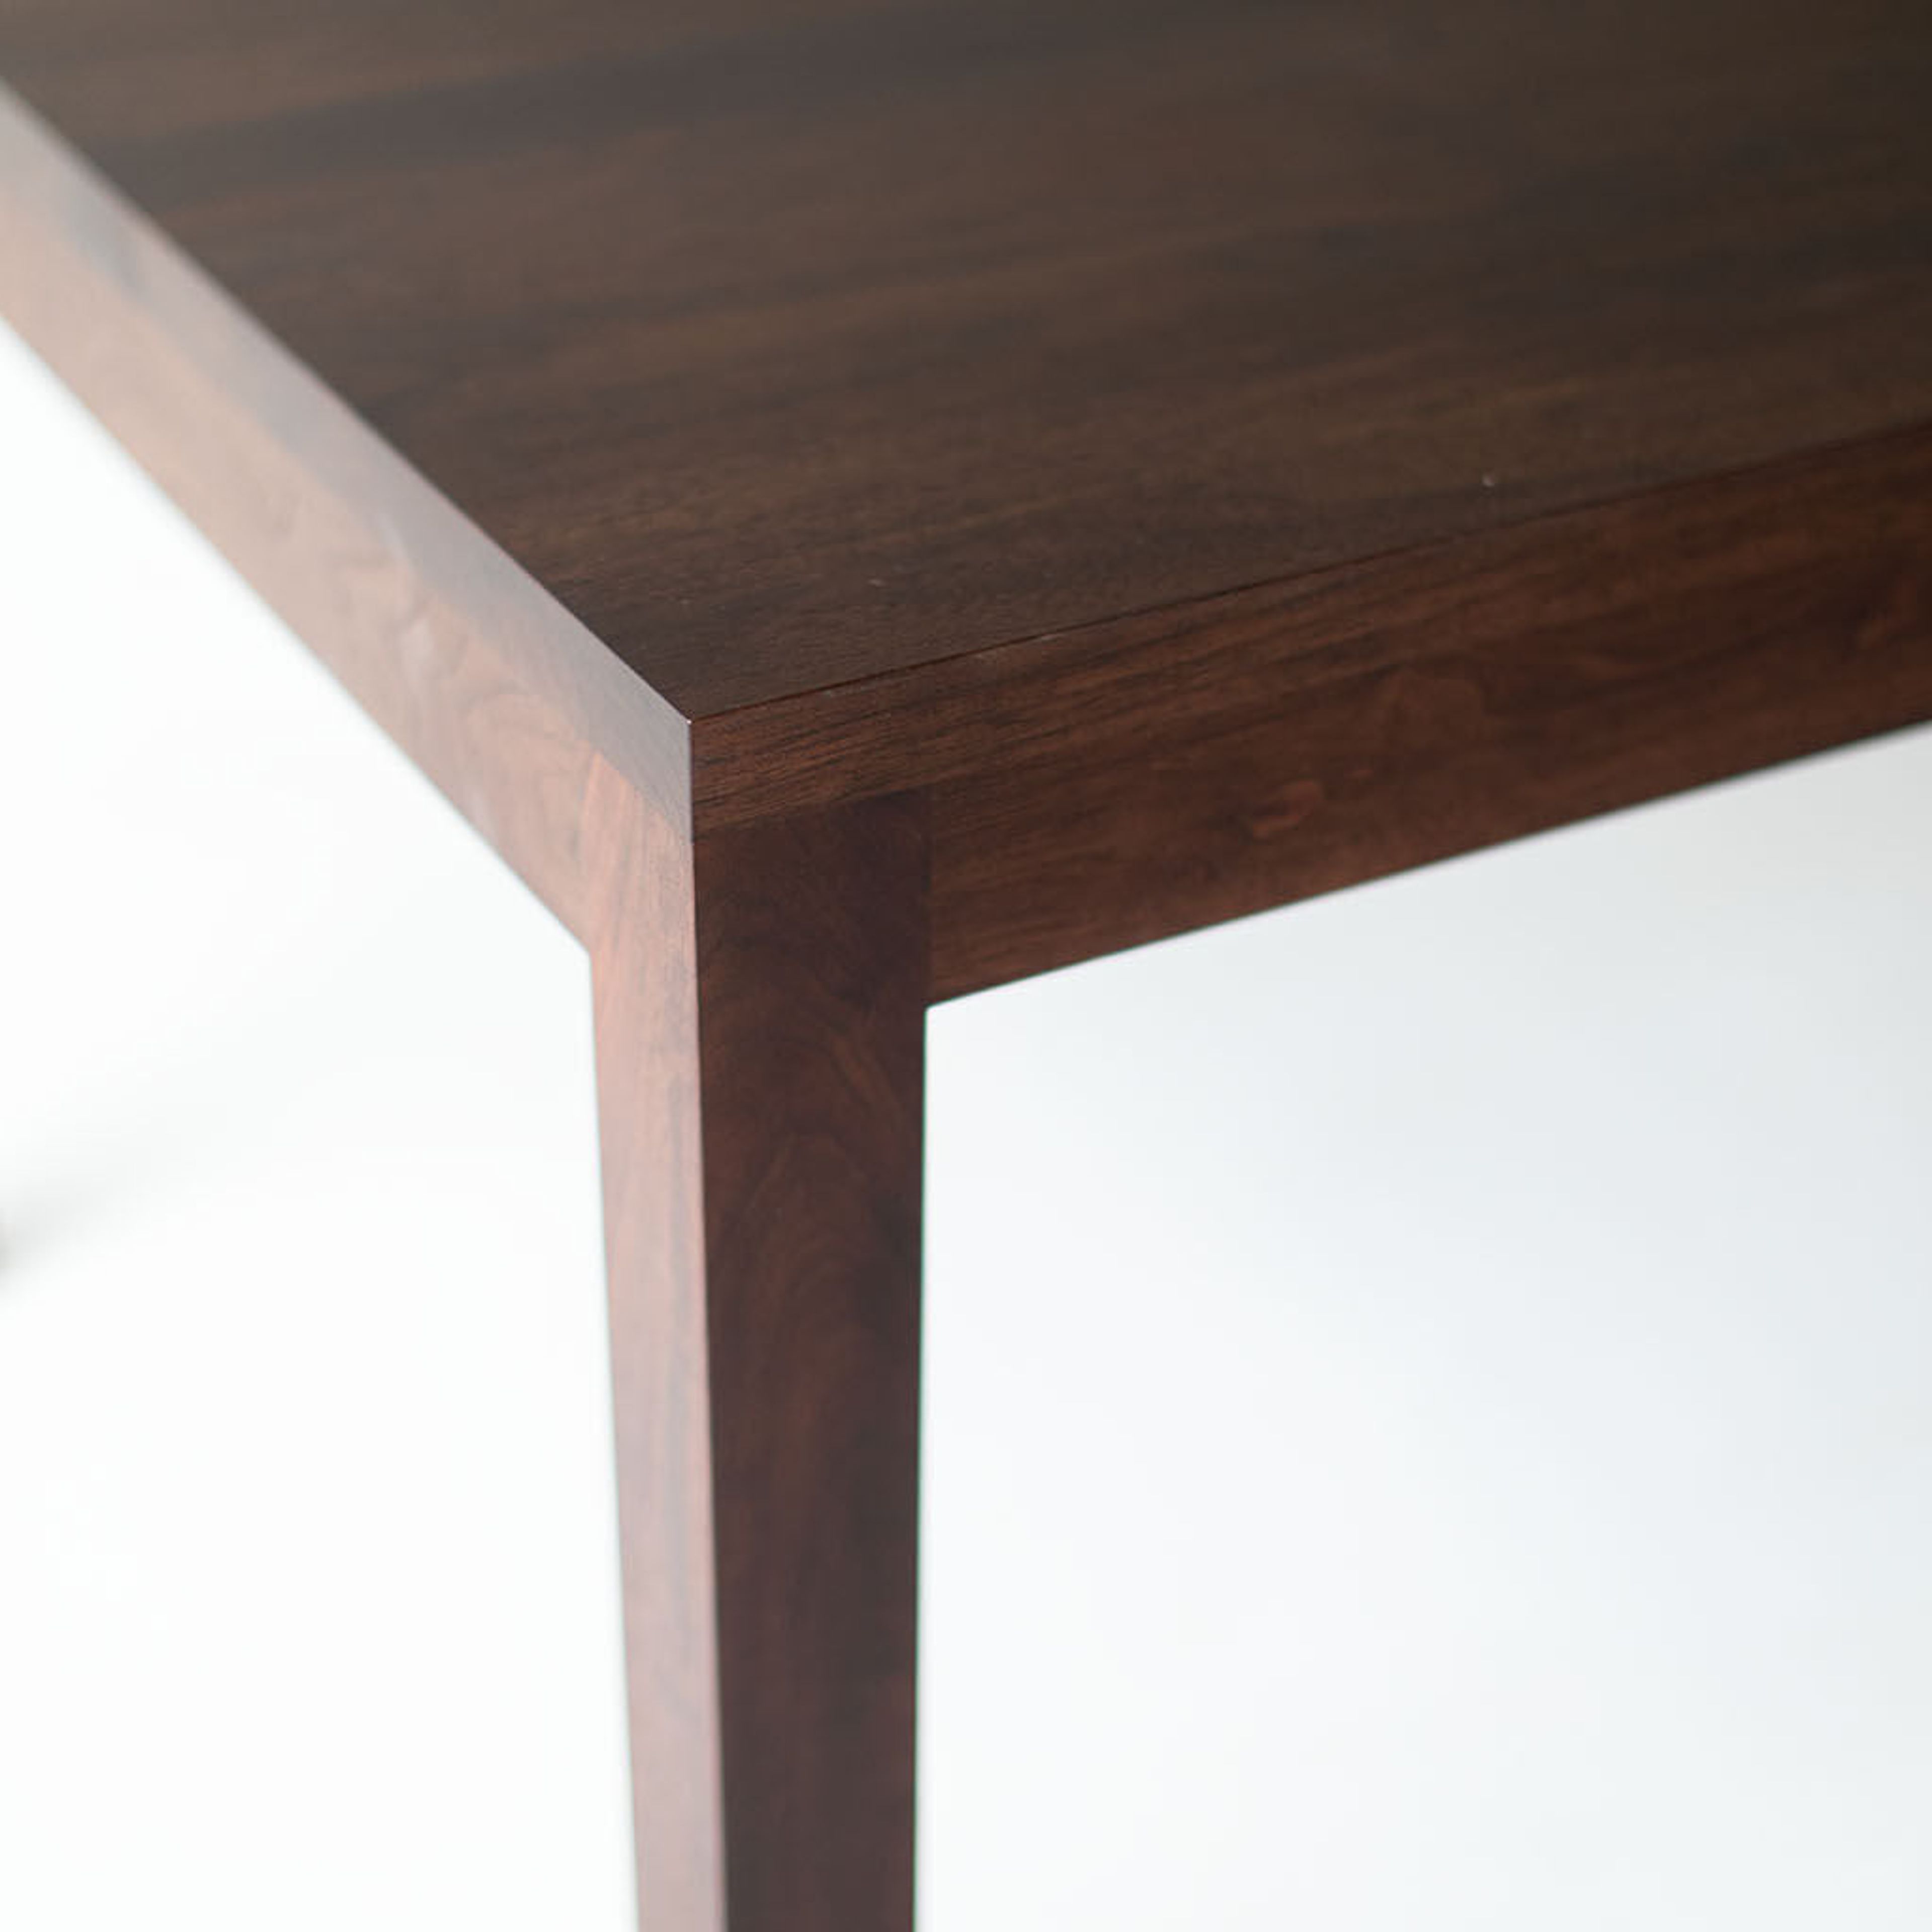 Modern Dining Table with Extension - "The Christopher"